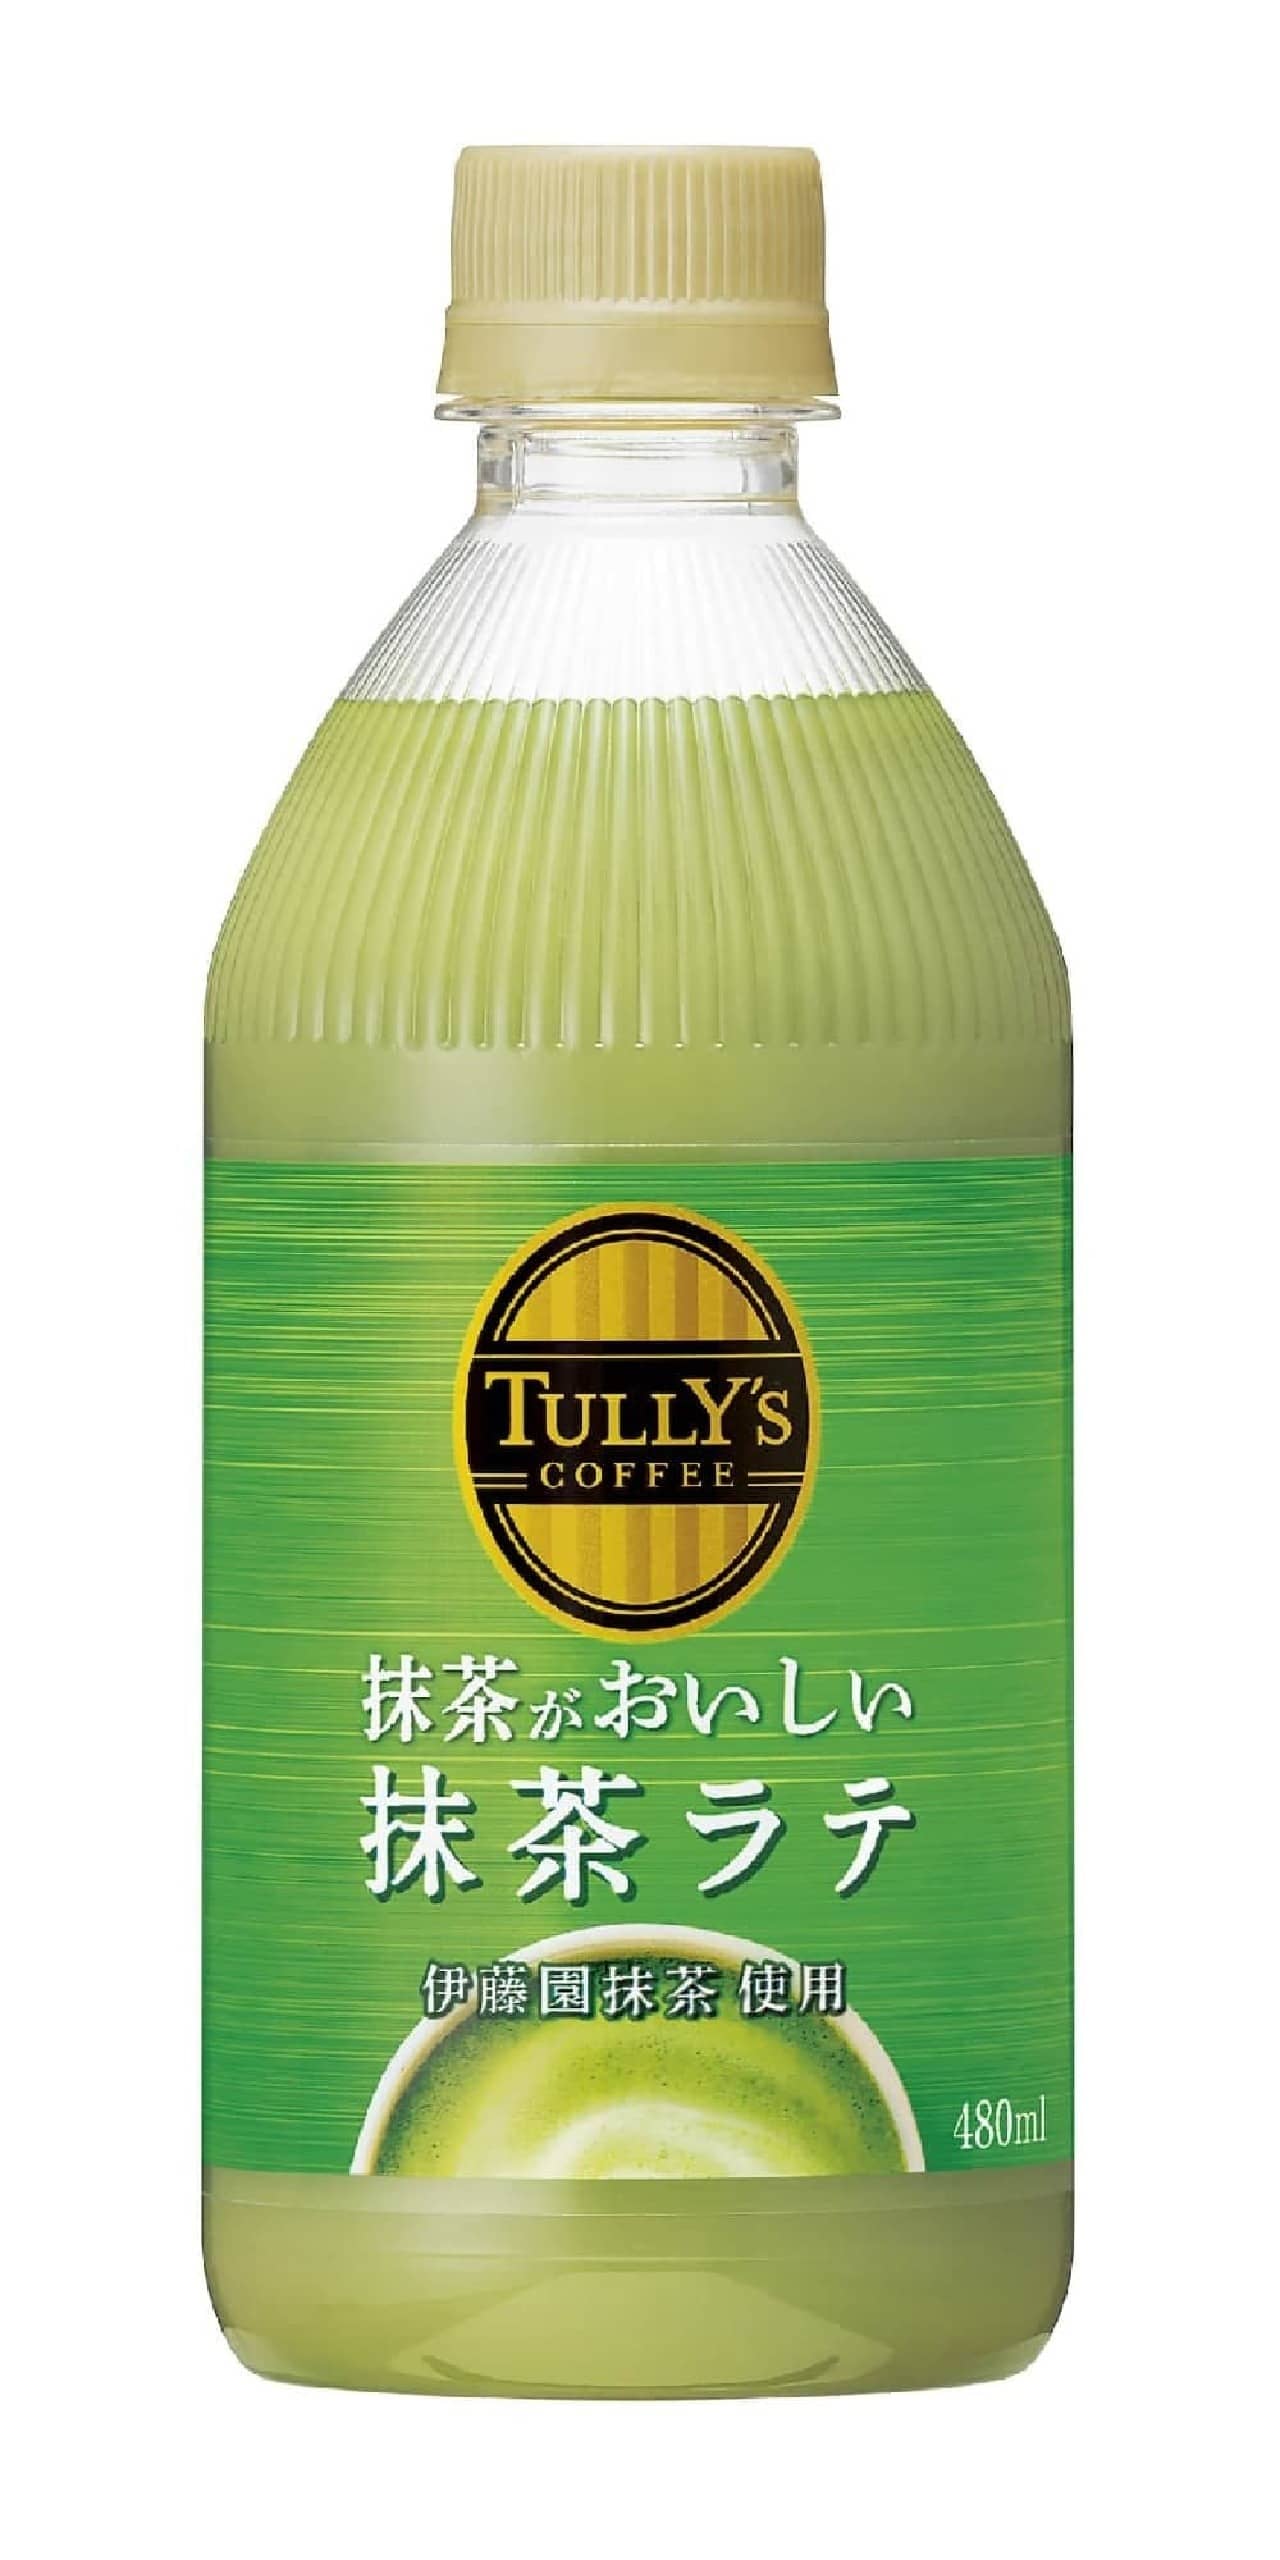 TULLY'S COFFEE Green Tea Latte" is the second Japanese tea latte that ...